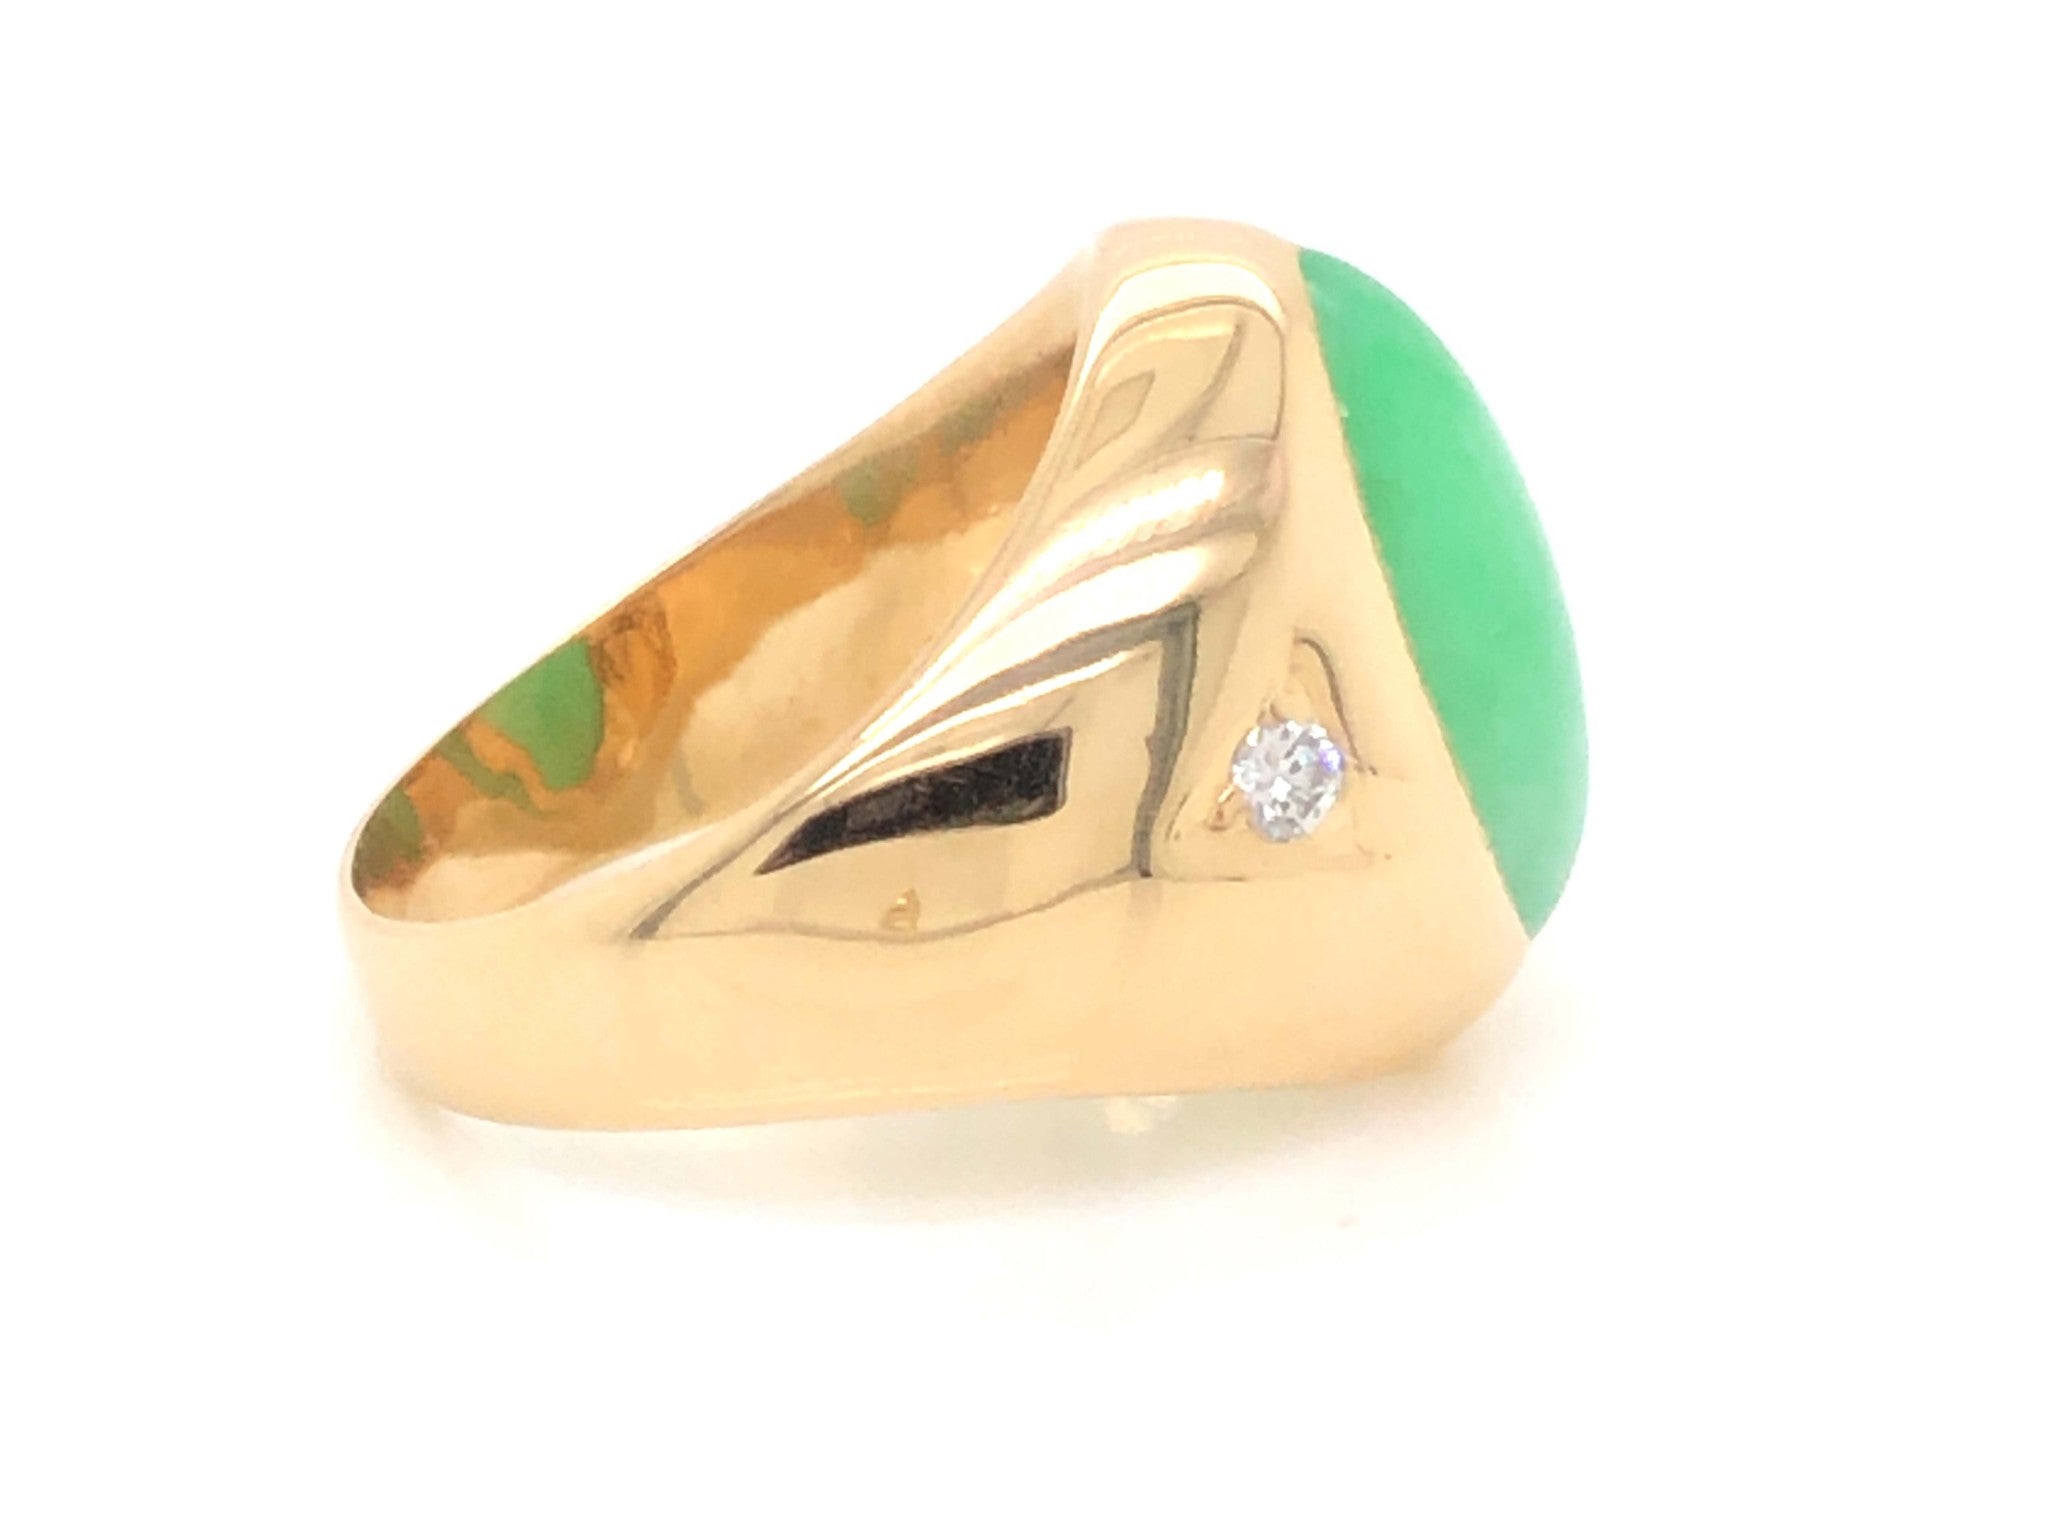 Oval Green Jade and Diamond Ring - 14k Yellow Gold